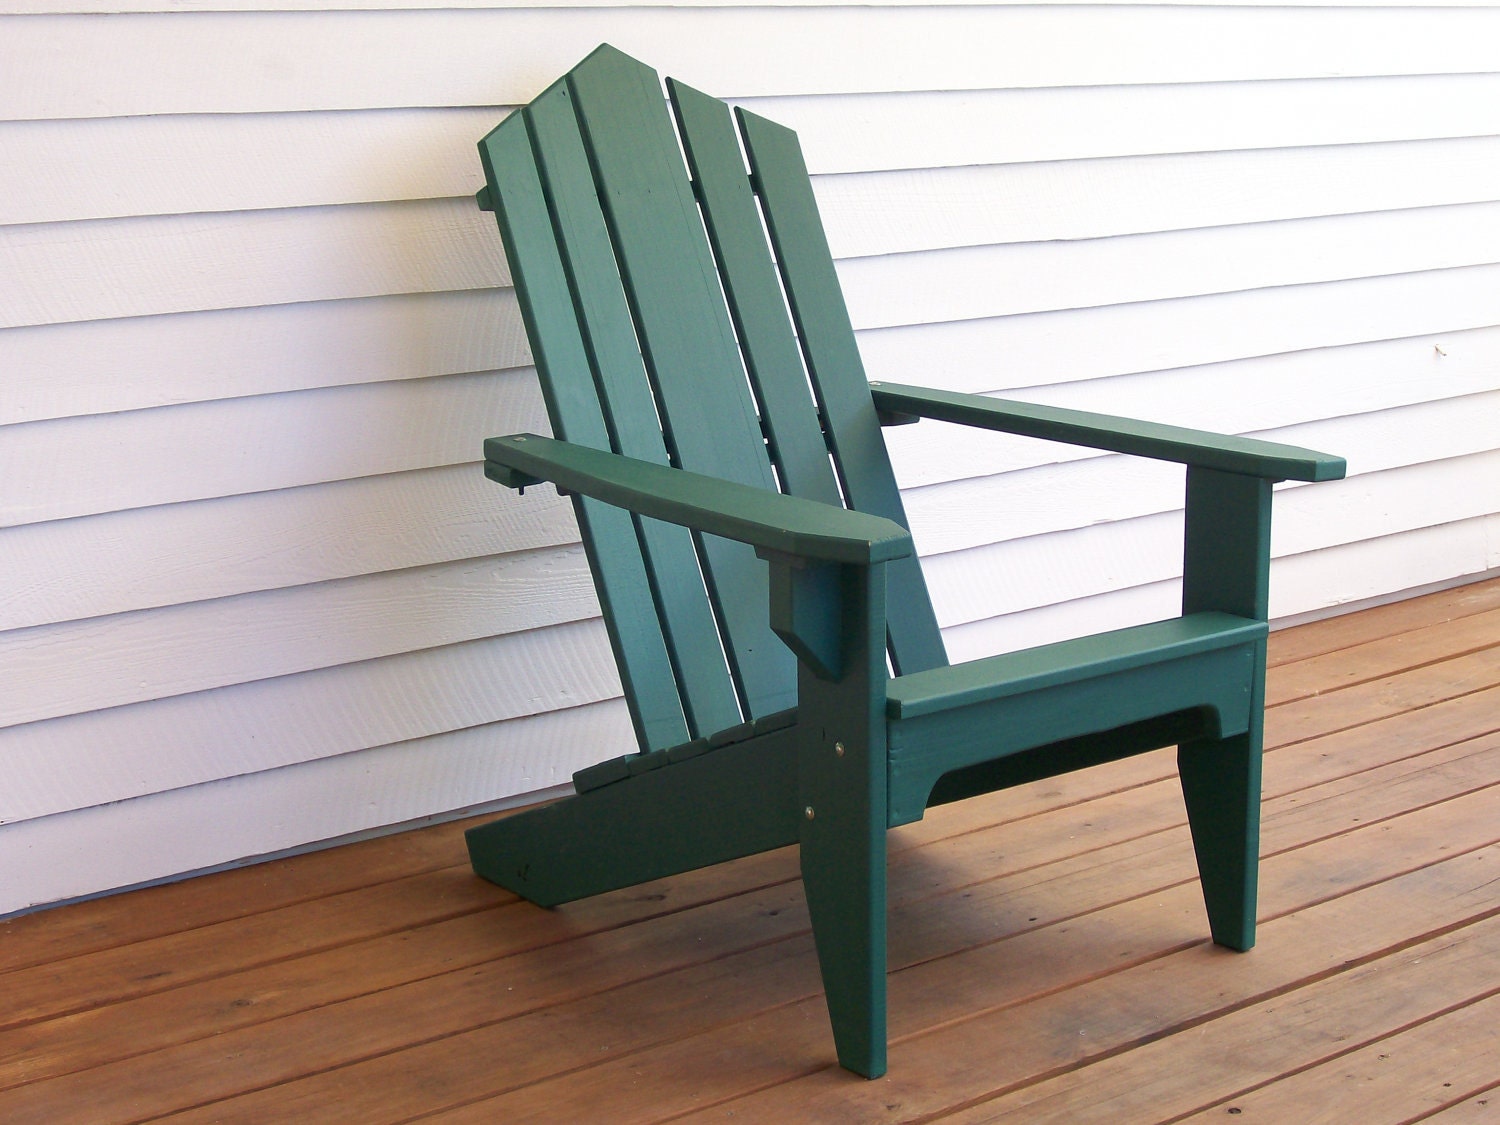 Galleries Related: Adirondack Chairs , Wooden Deck Chair Plans ,